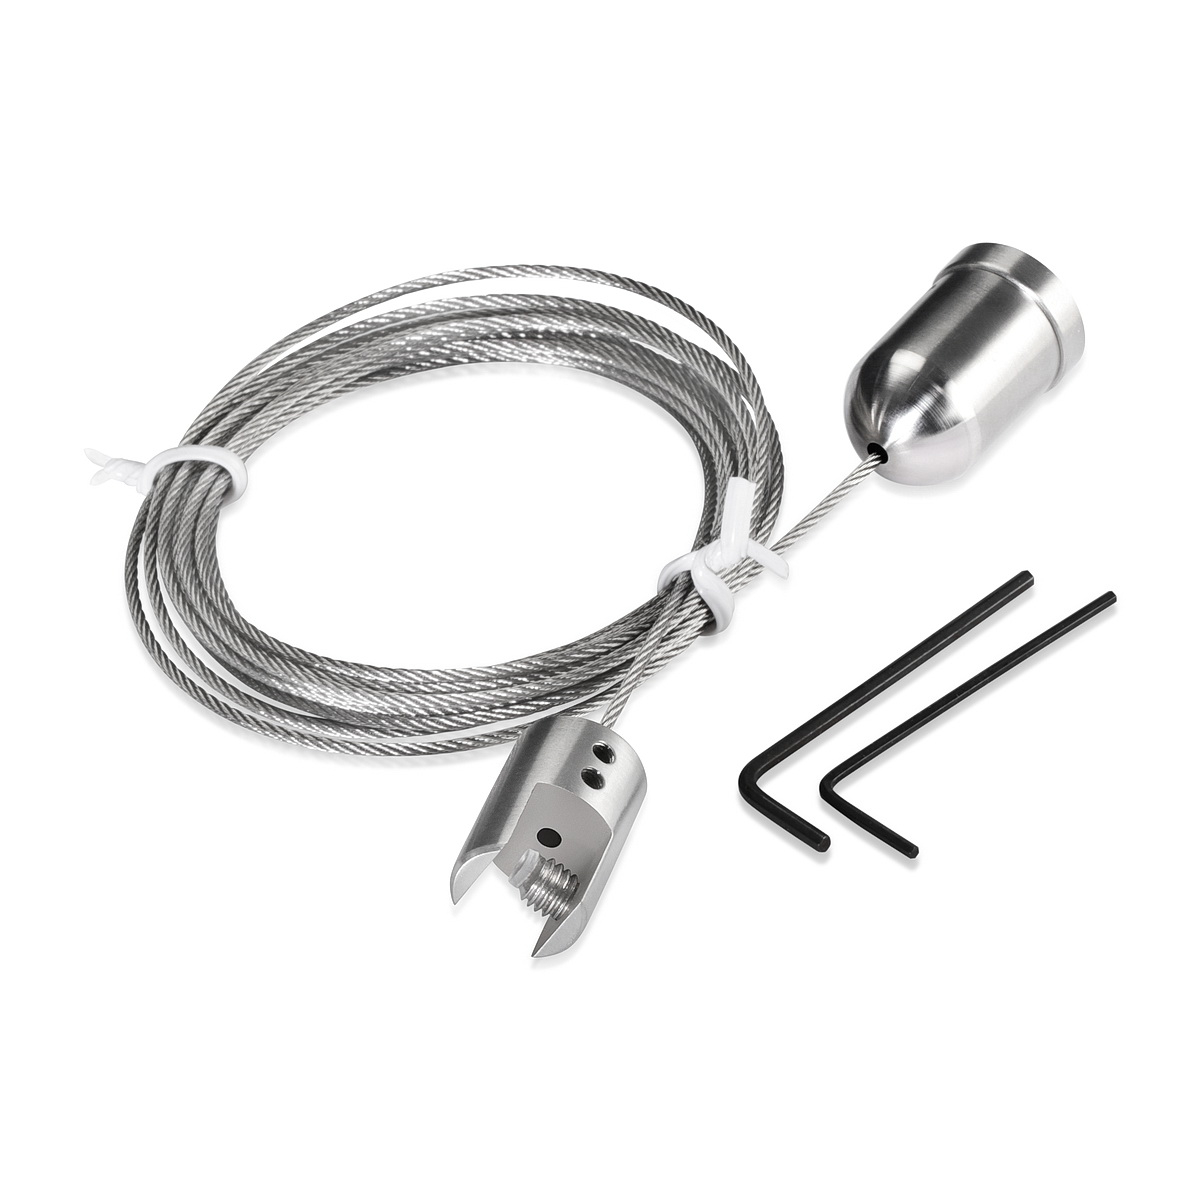 Ceiling Suspended Cable Kit - Stainless Steel - 1/16'' Diameter Cable